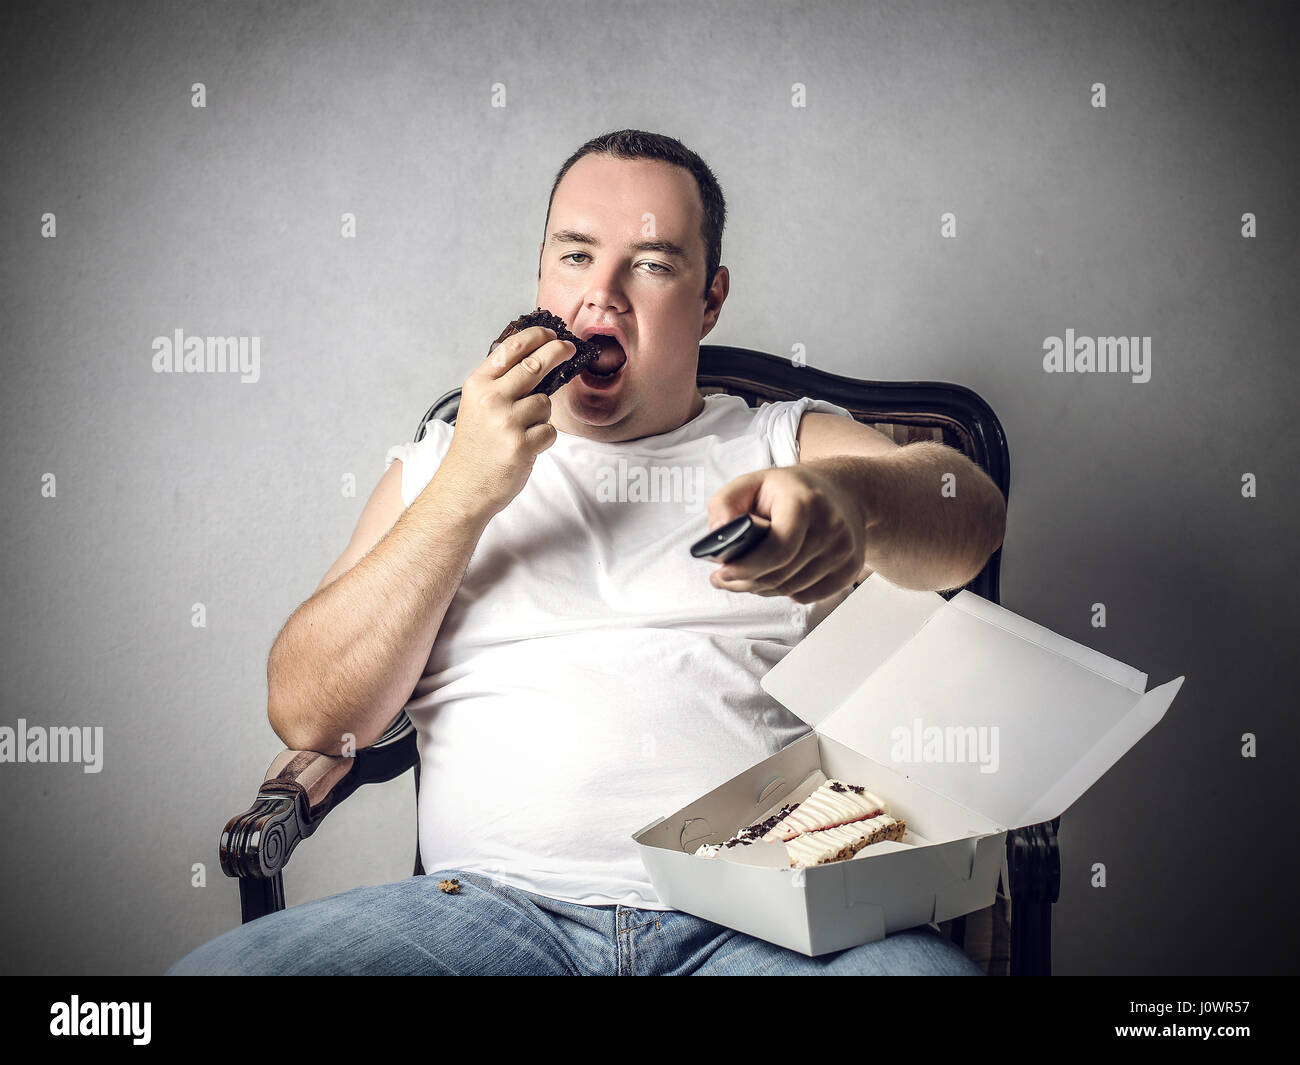 Fat man eating cookies inside Stock Photo